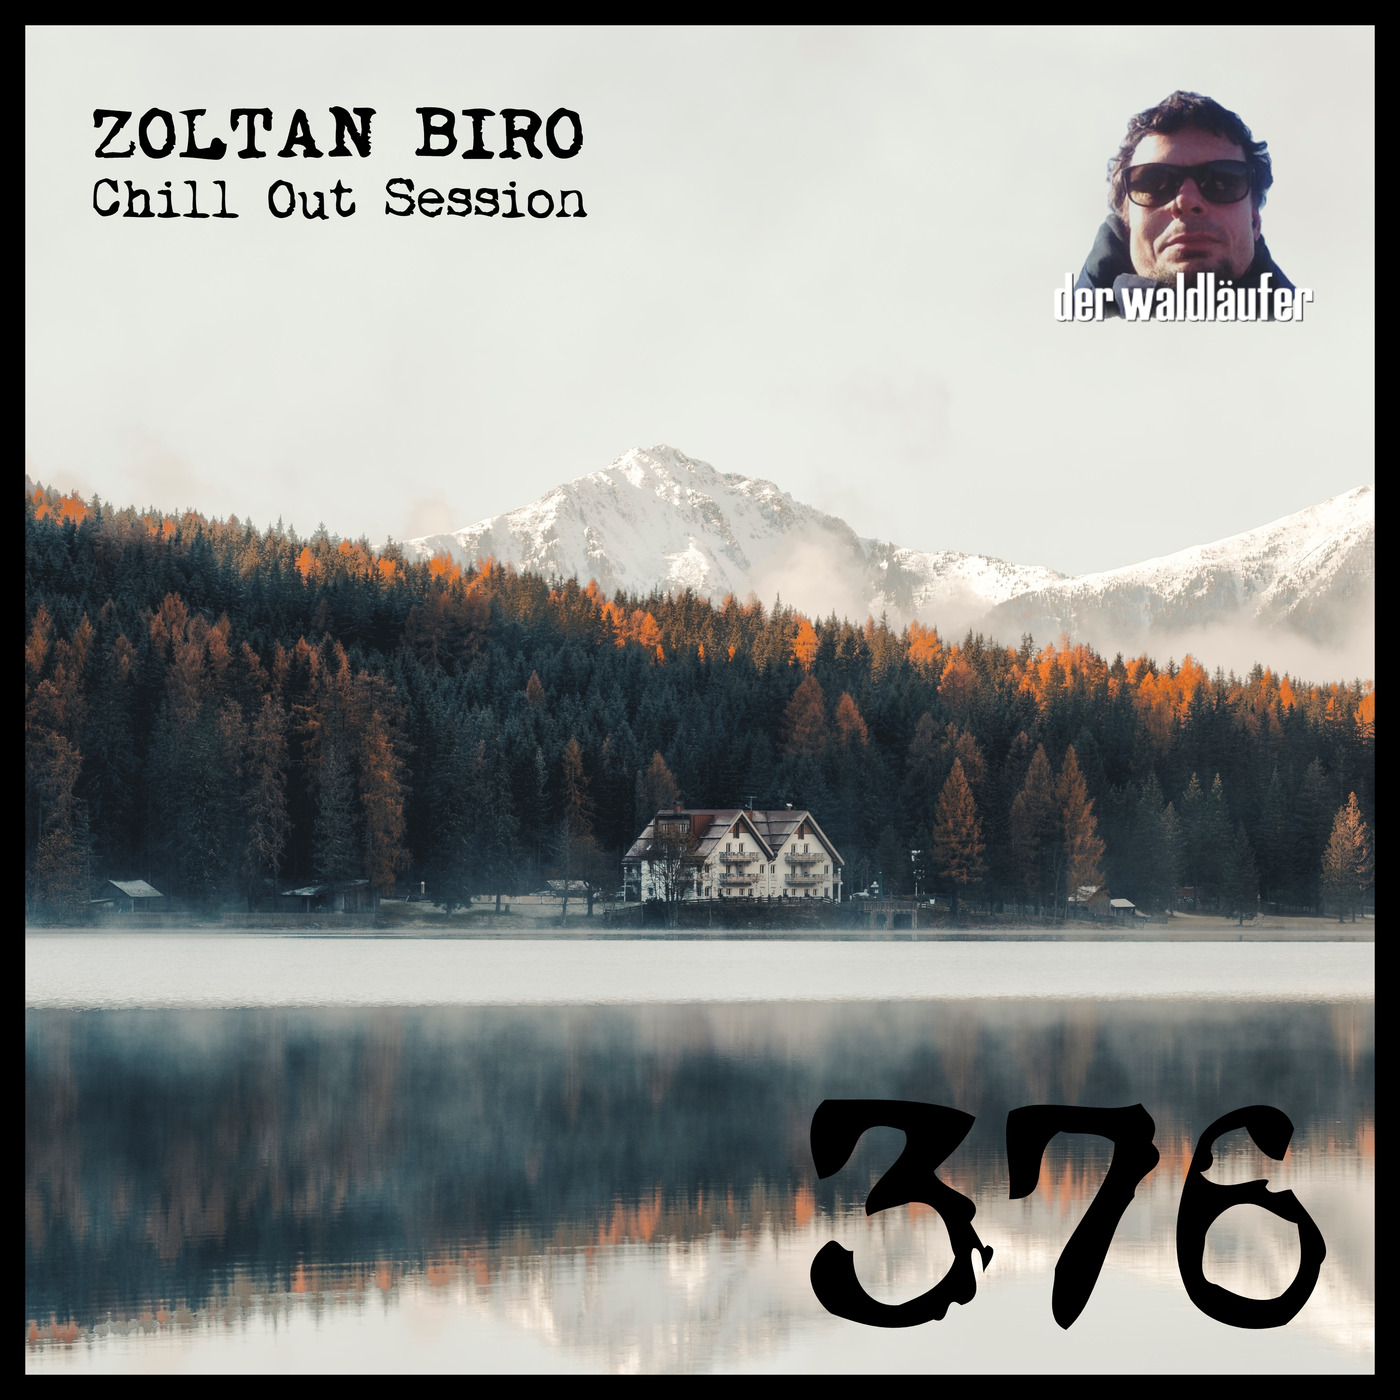 Zoltan Biro - Chill Out Session 376 [including: Der Waldläufer Special Mix]